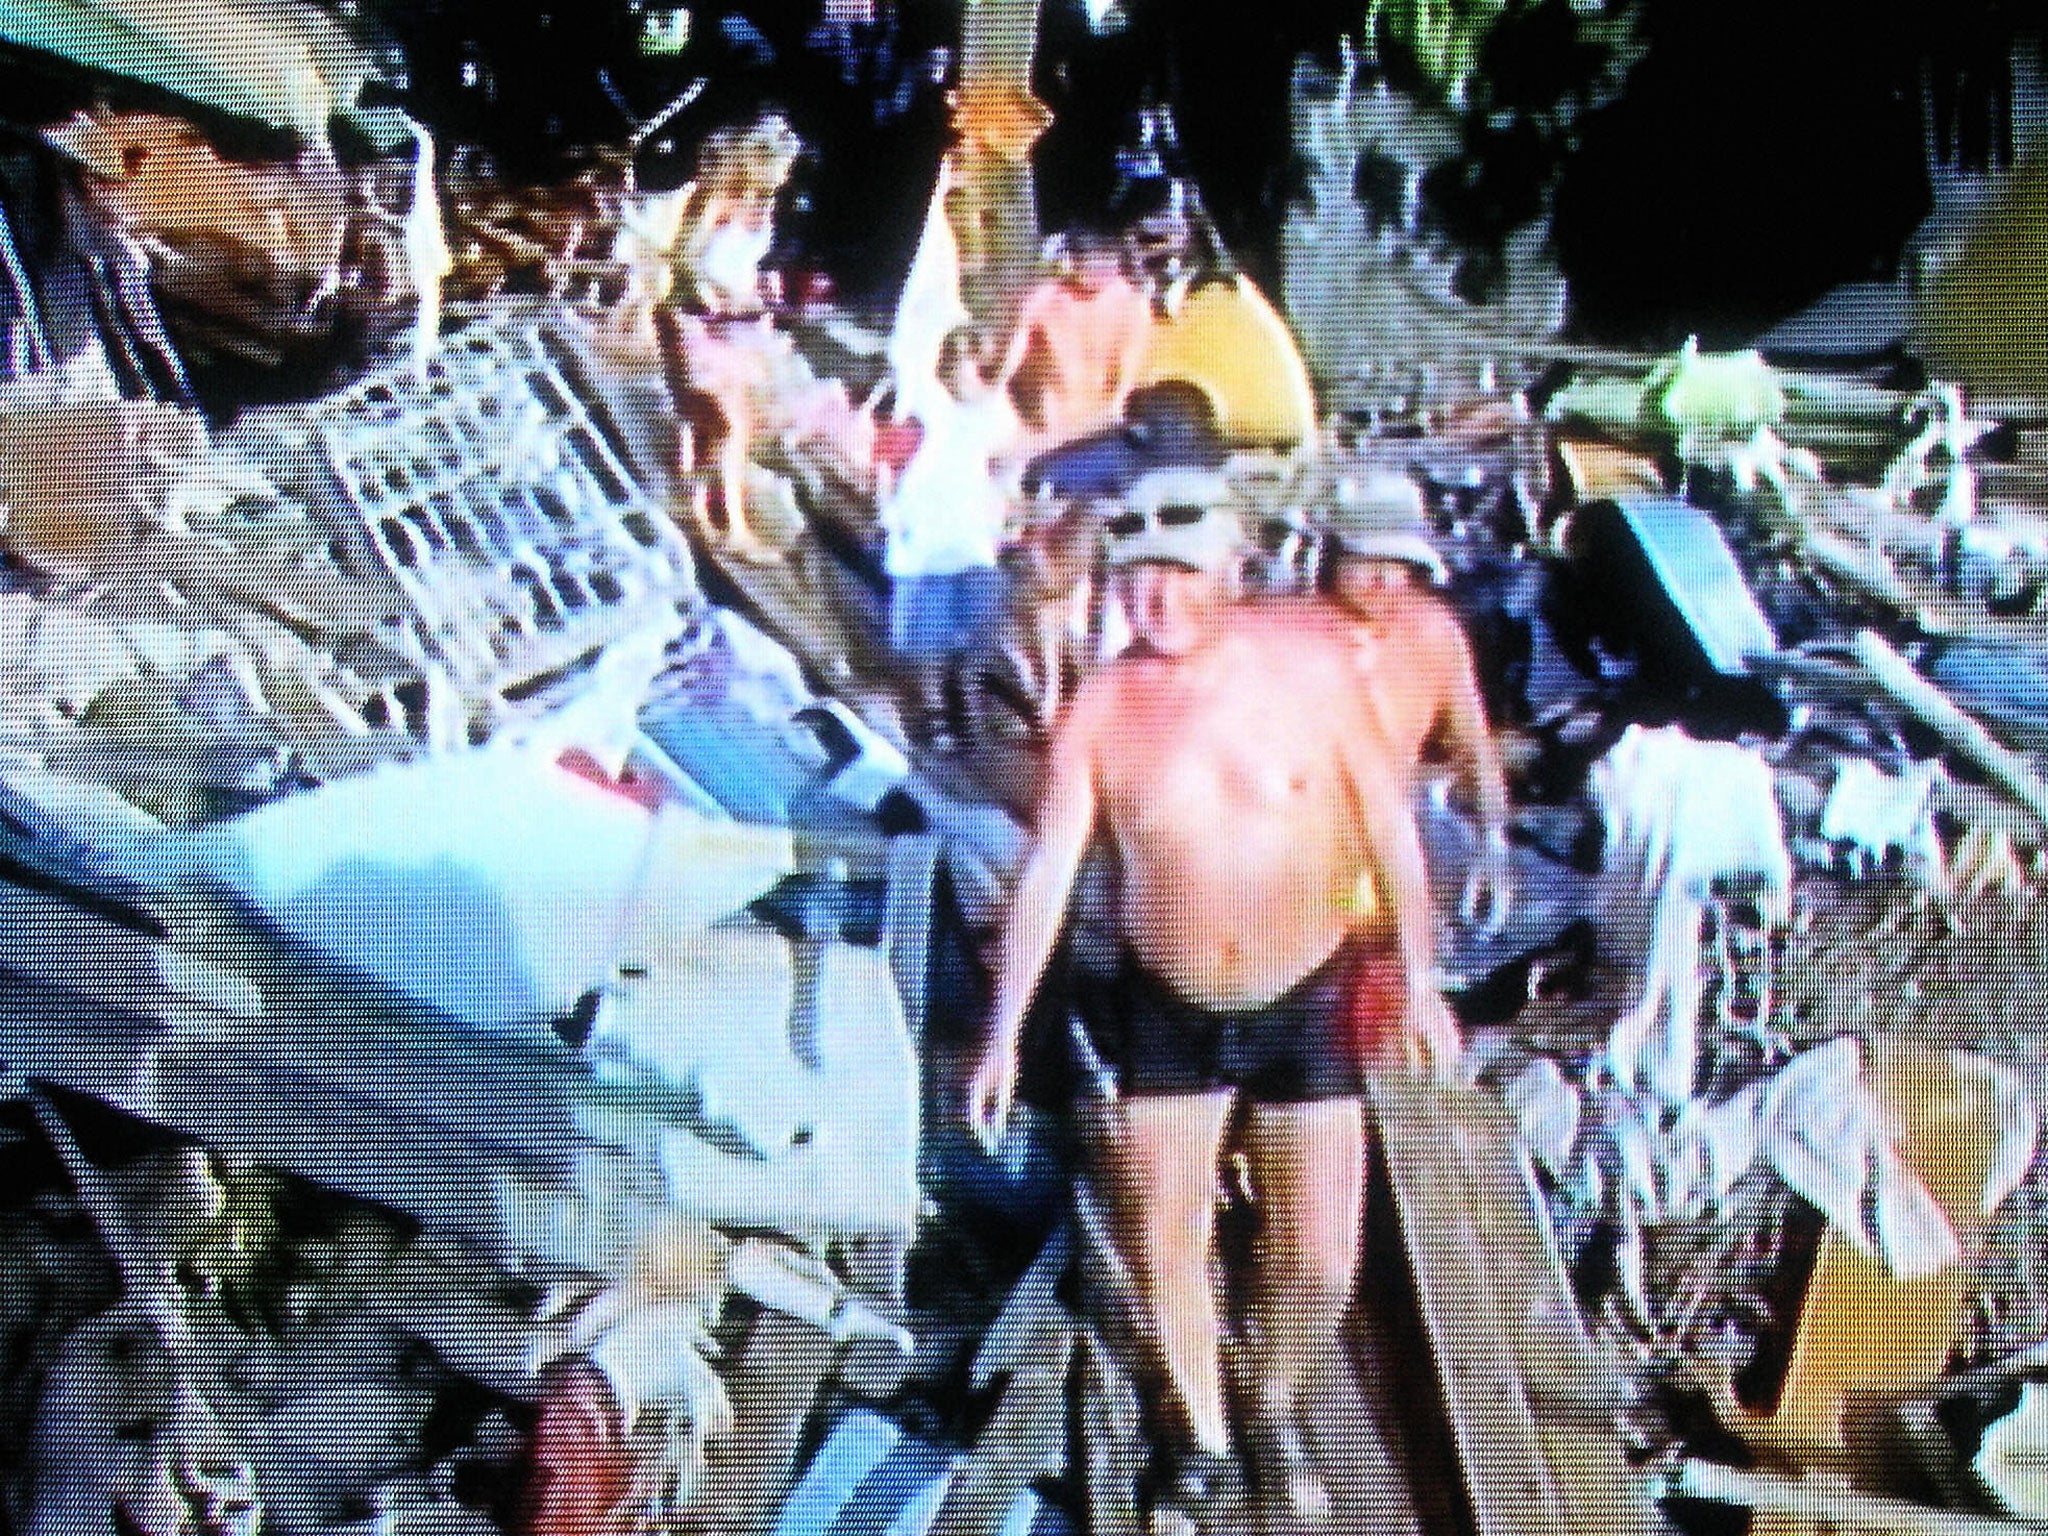 Tourist walk through the debris in Thailand in the aftermath of the 2004 tsunami